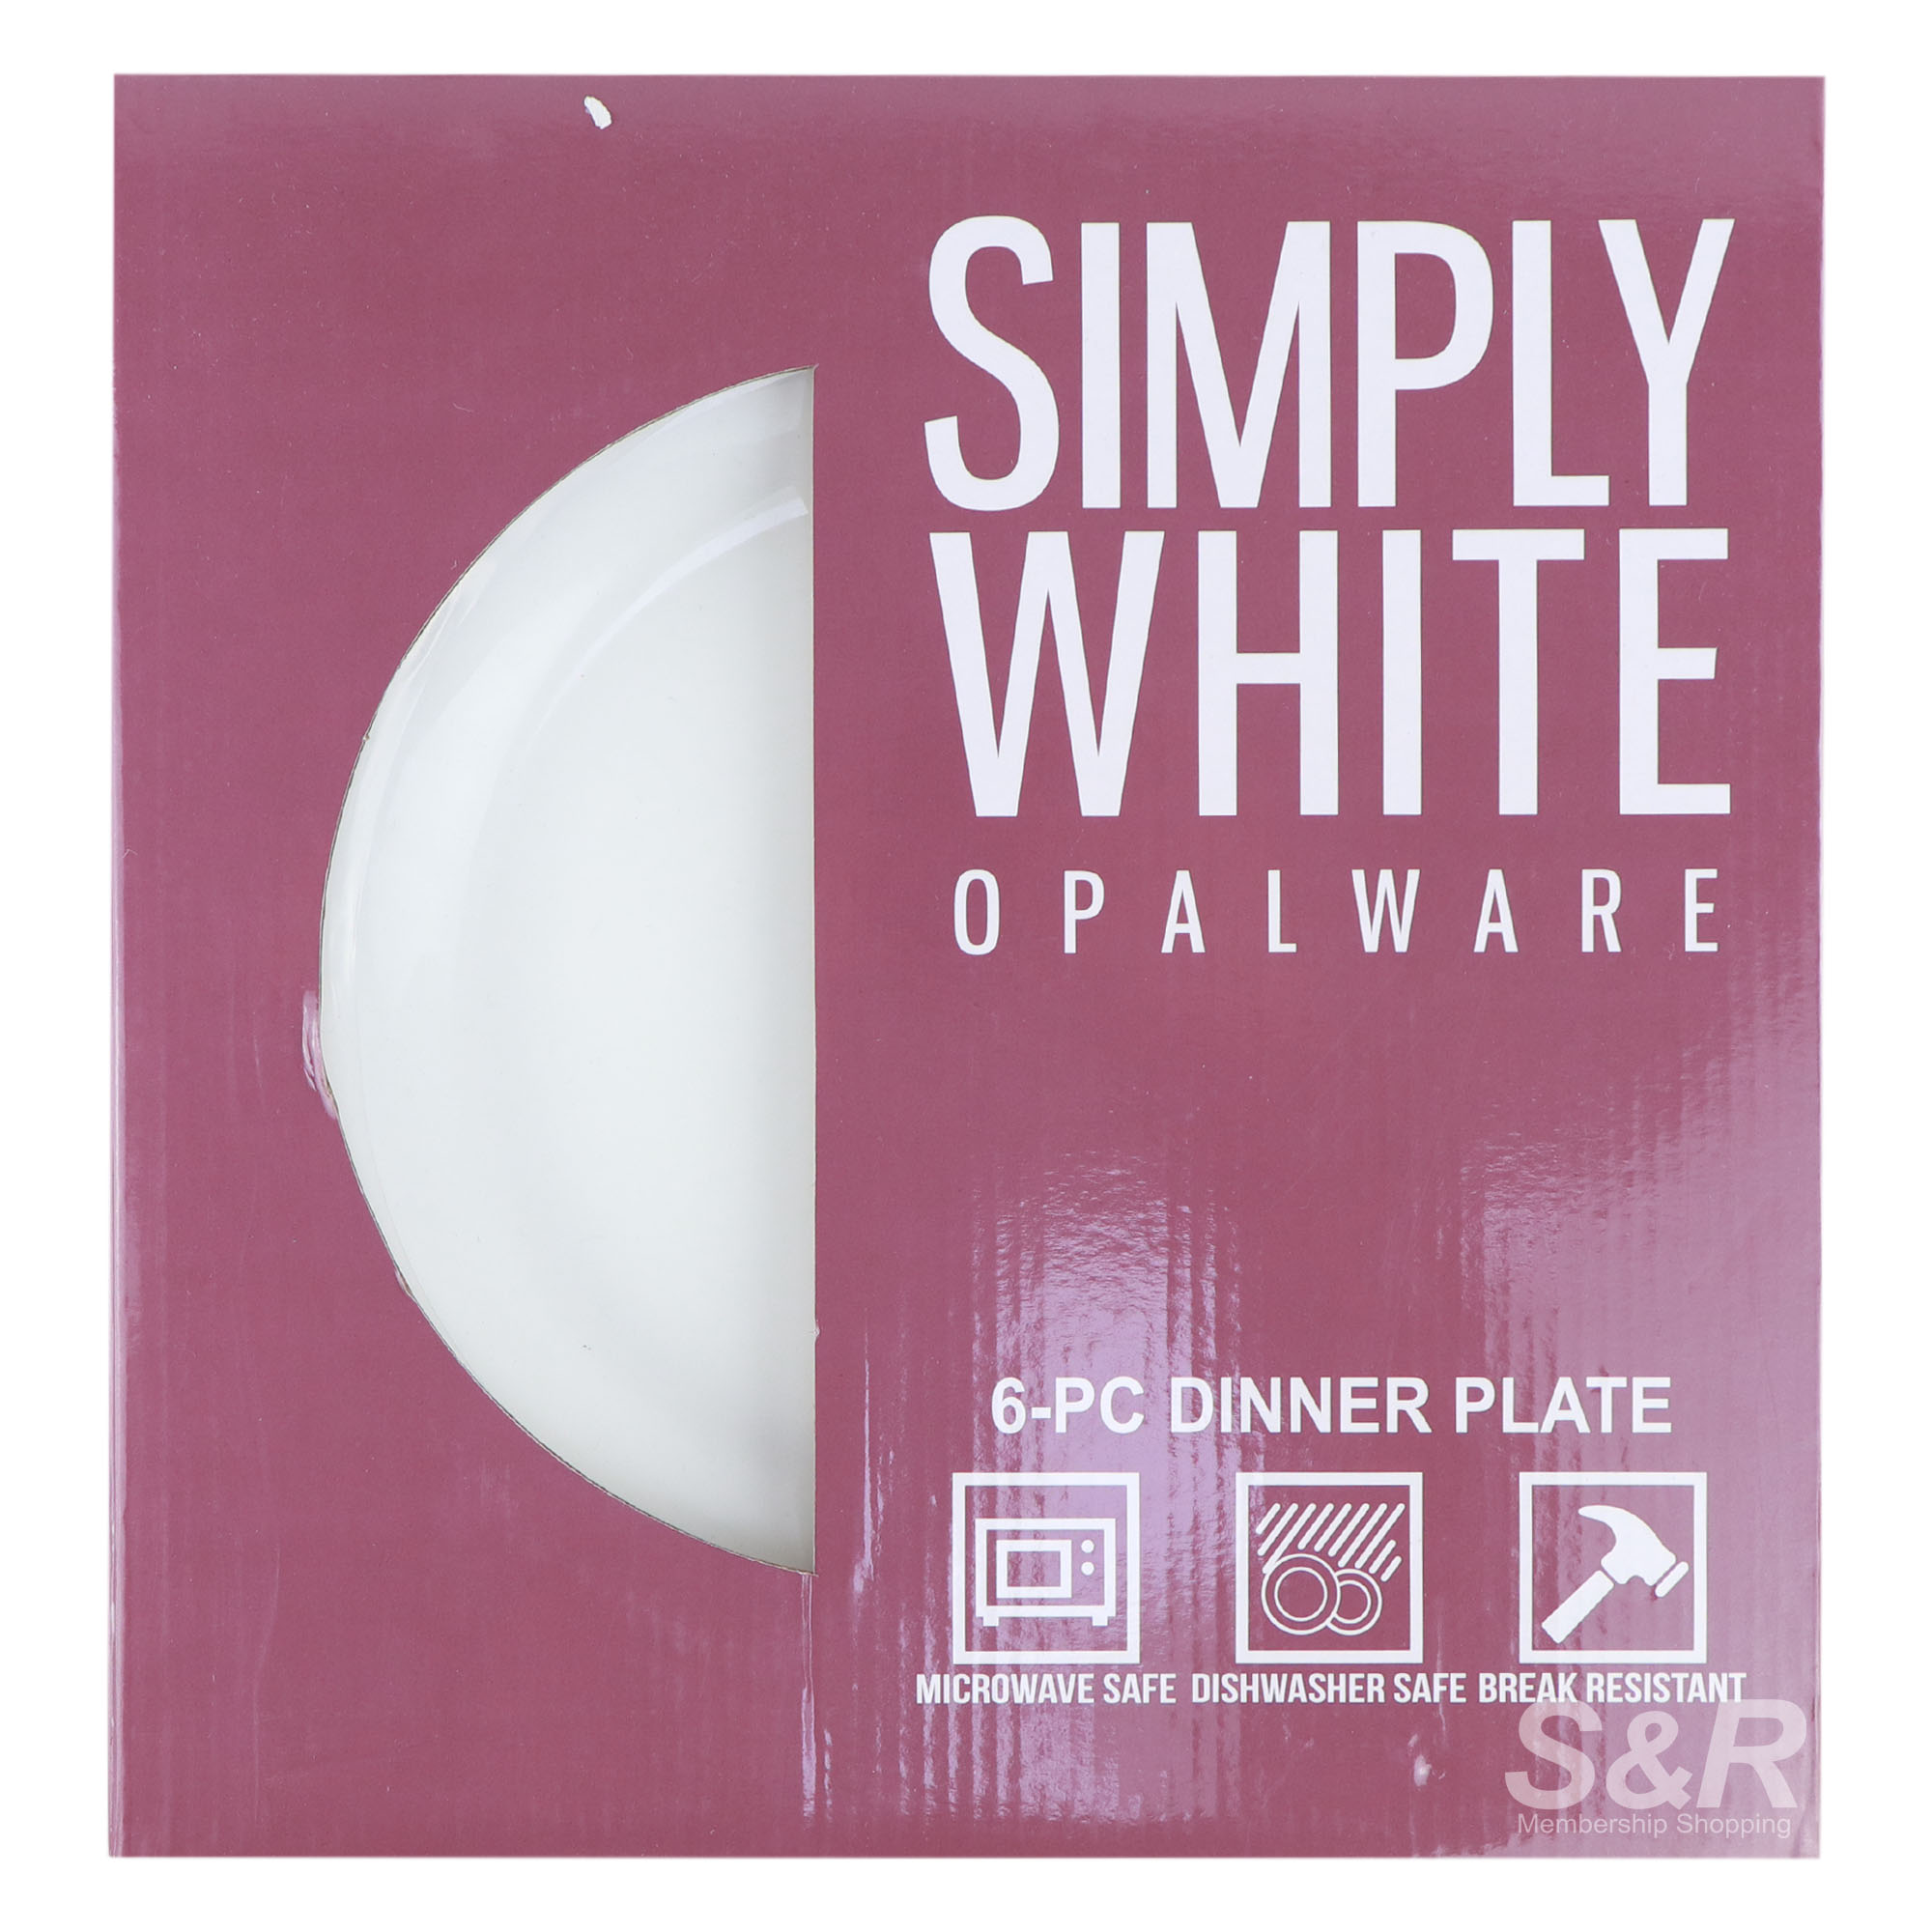 Simply White Opalware Dinner Plate 6pcs